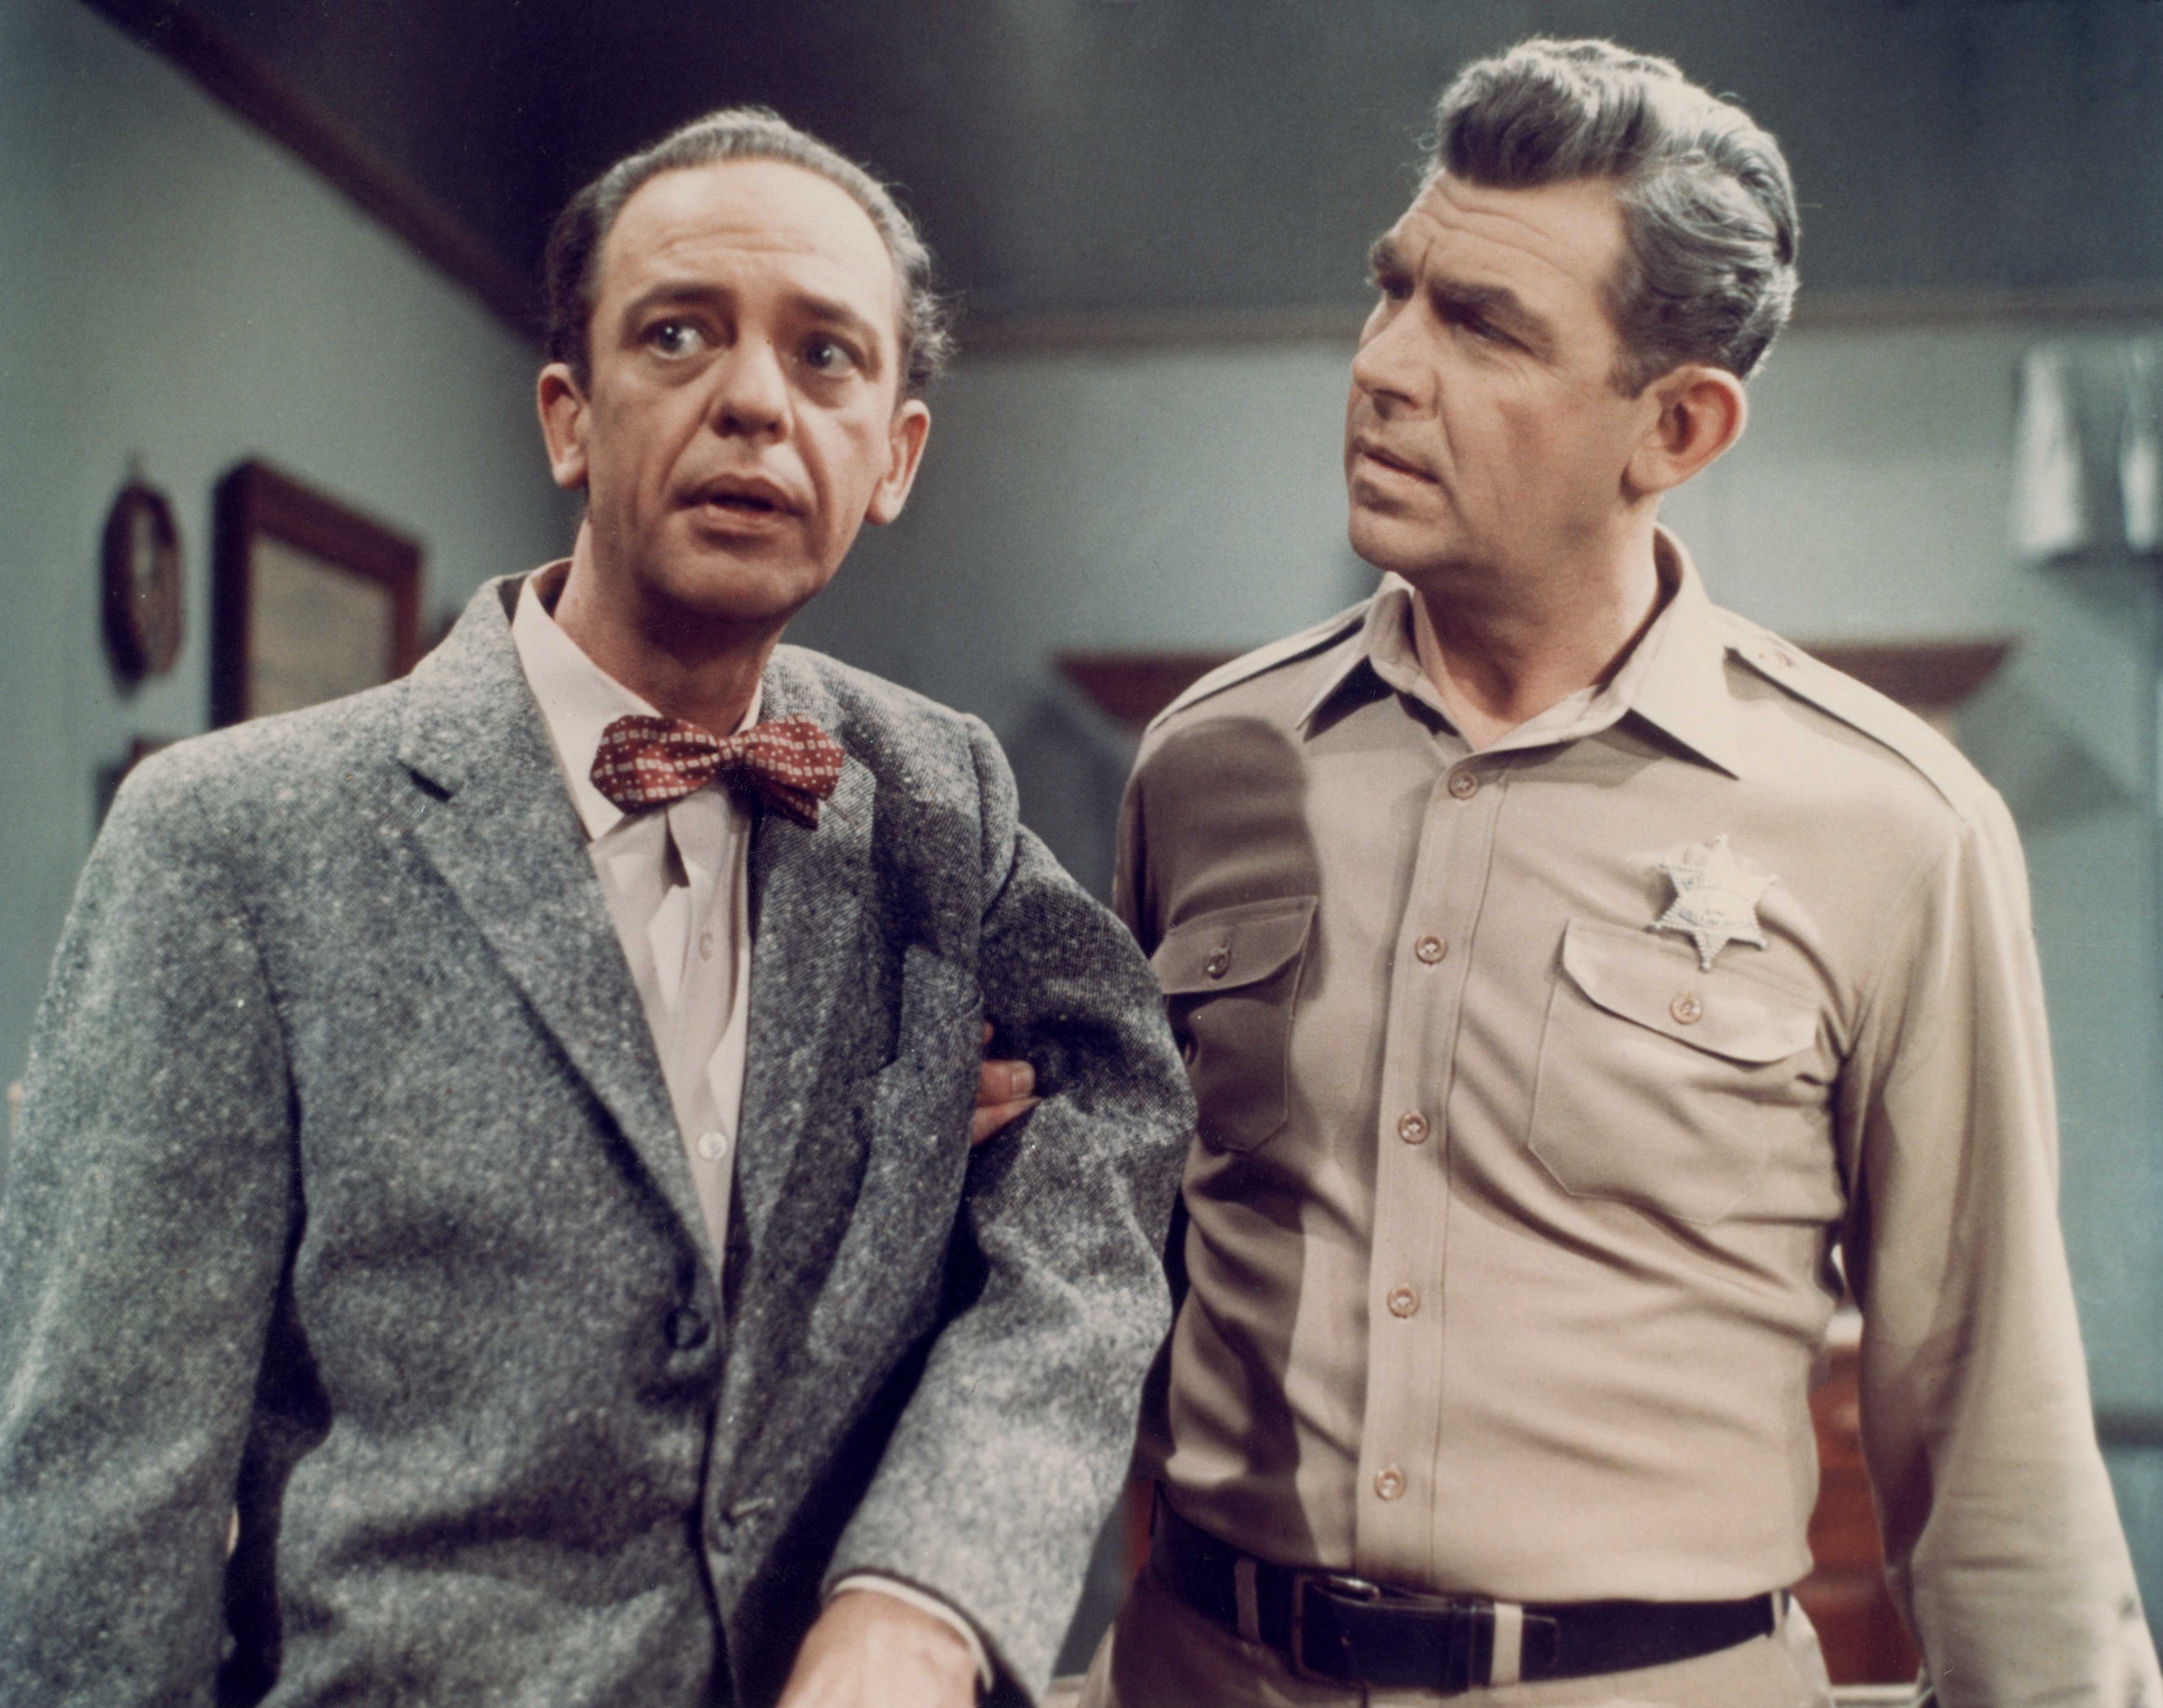 Don Knotts (1924 - 2006) as Deputy Barney Fife and Andy Griffith (right) as Sheriff Andy Taylor in a scene from the television series 'The Andy Griffith Show', circa 1965.